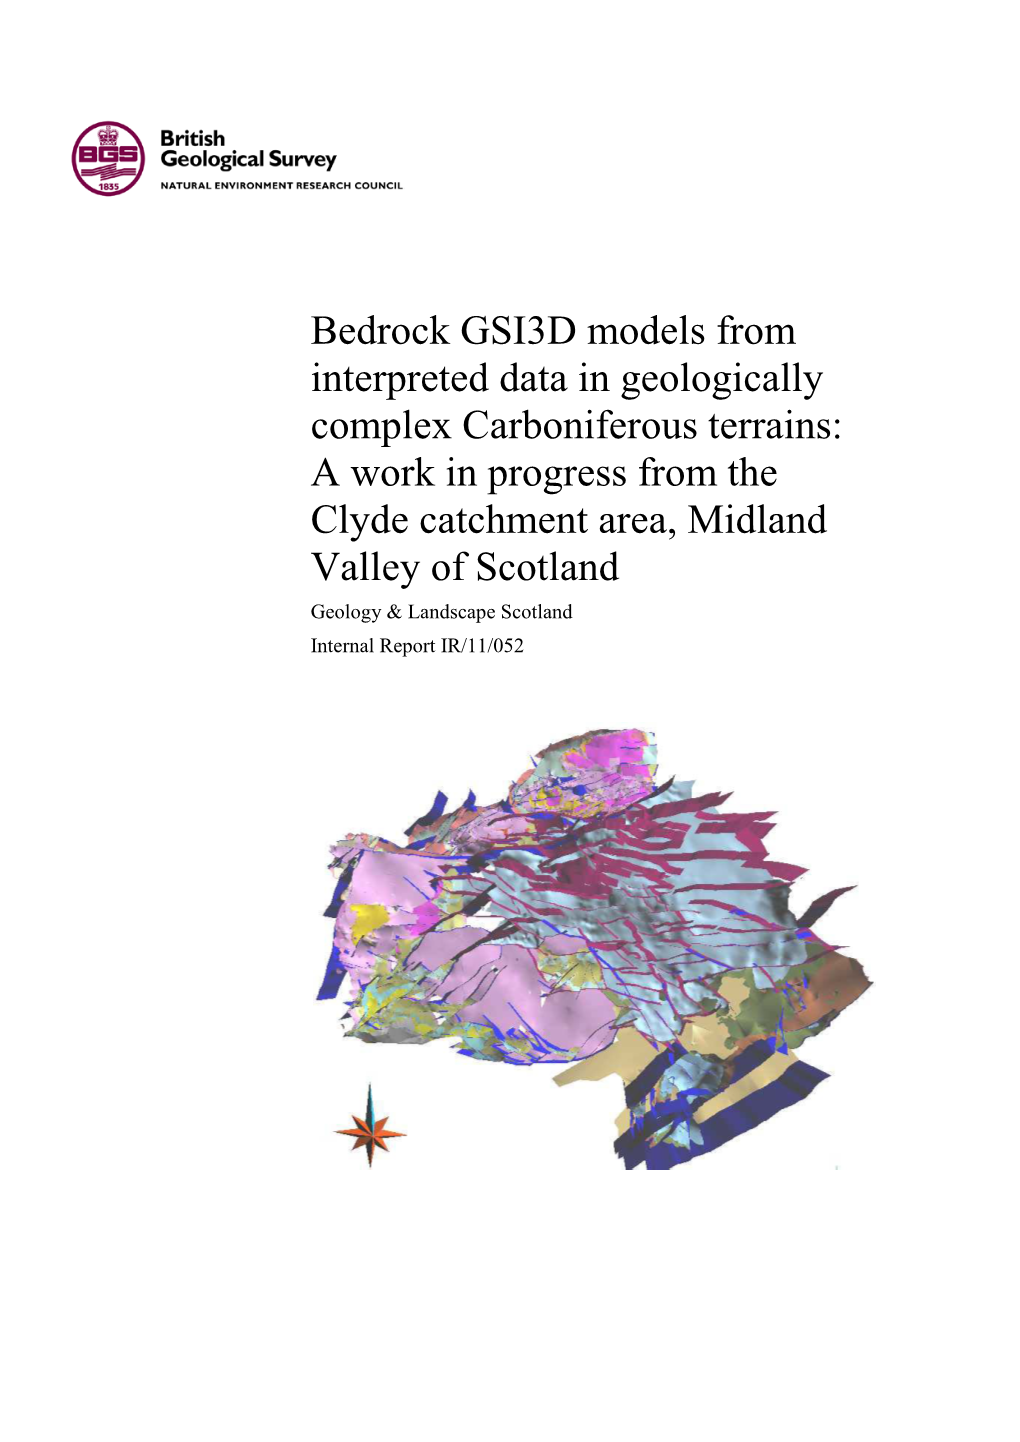 Bedrock GS13D Models from Interpreted Data in Geologically